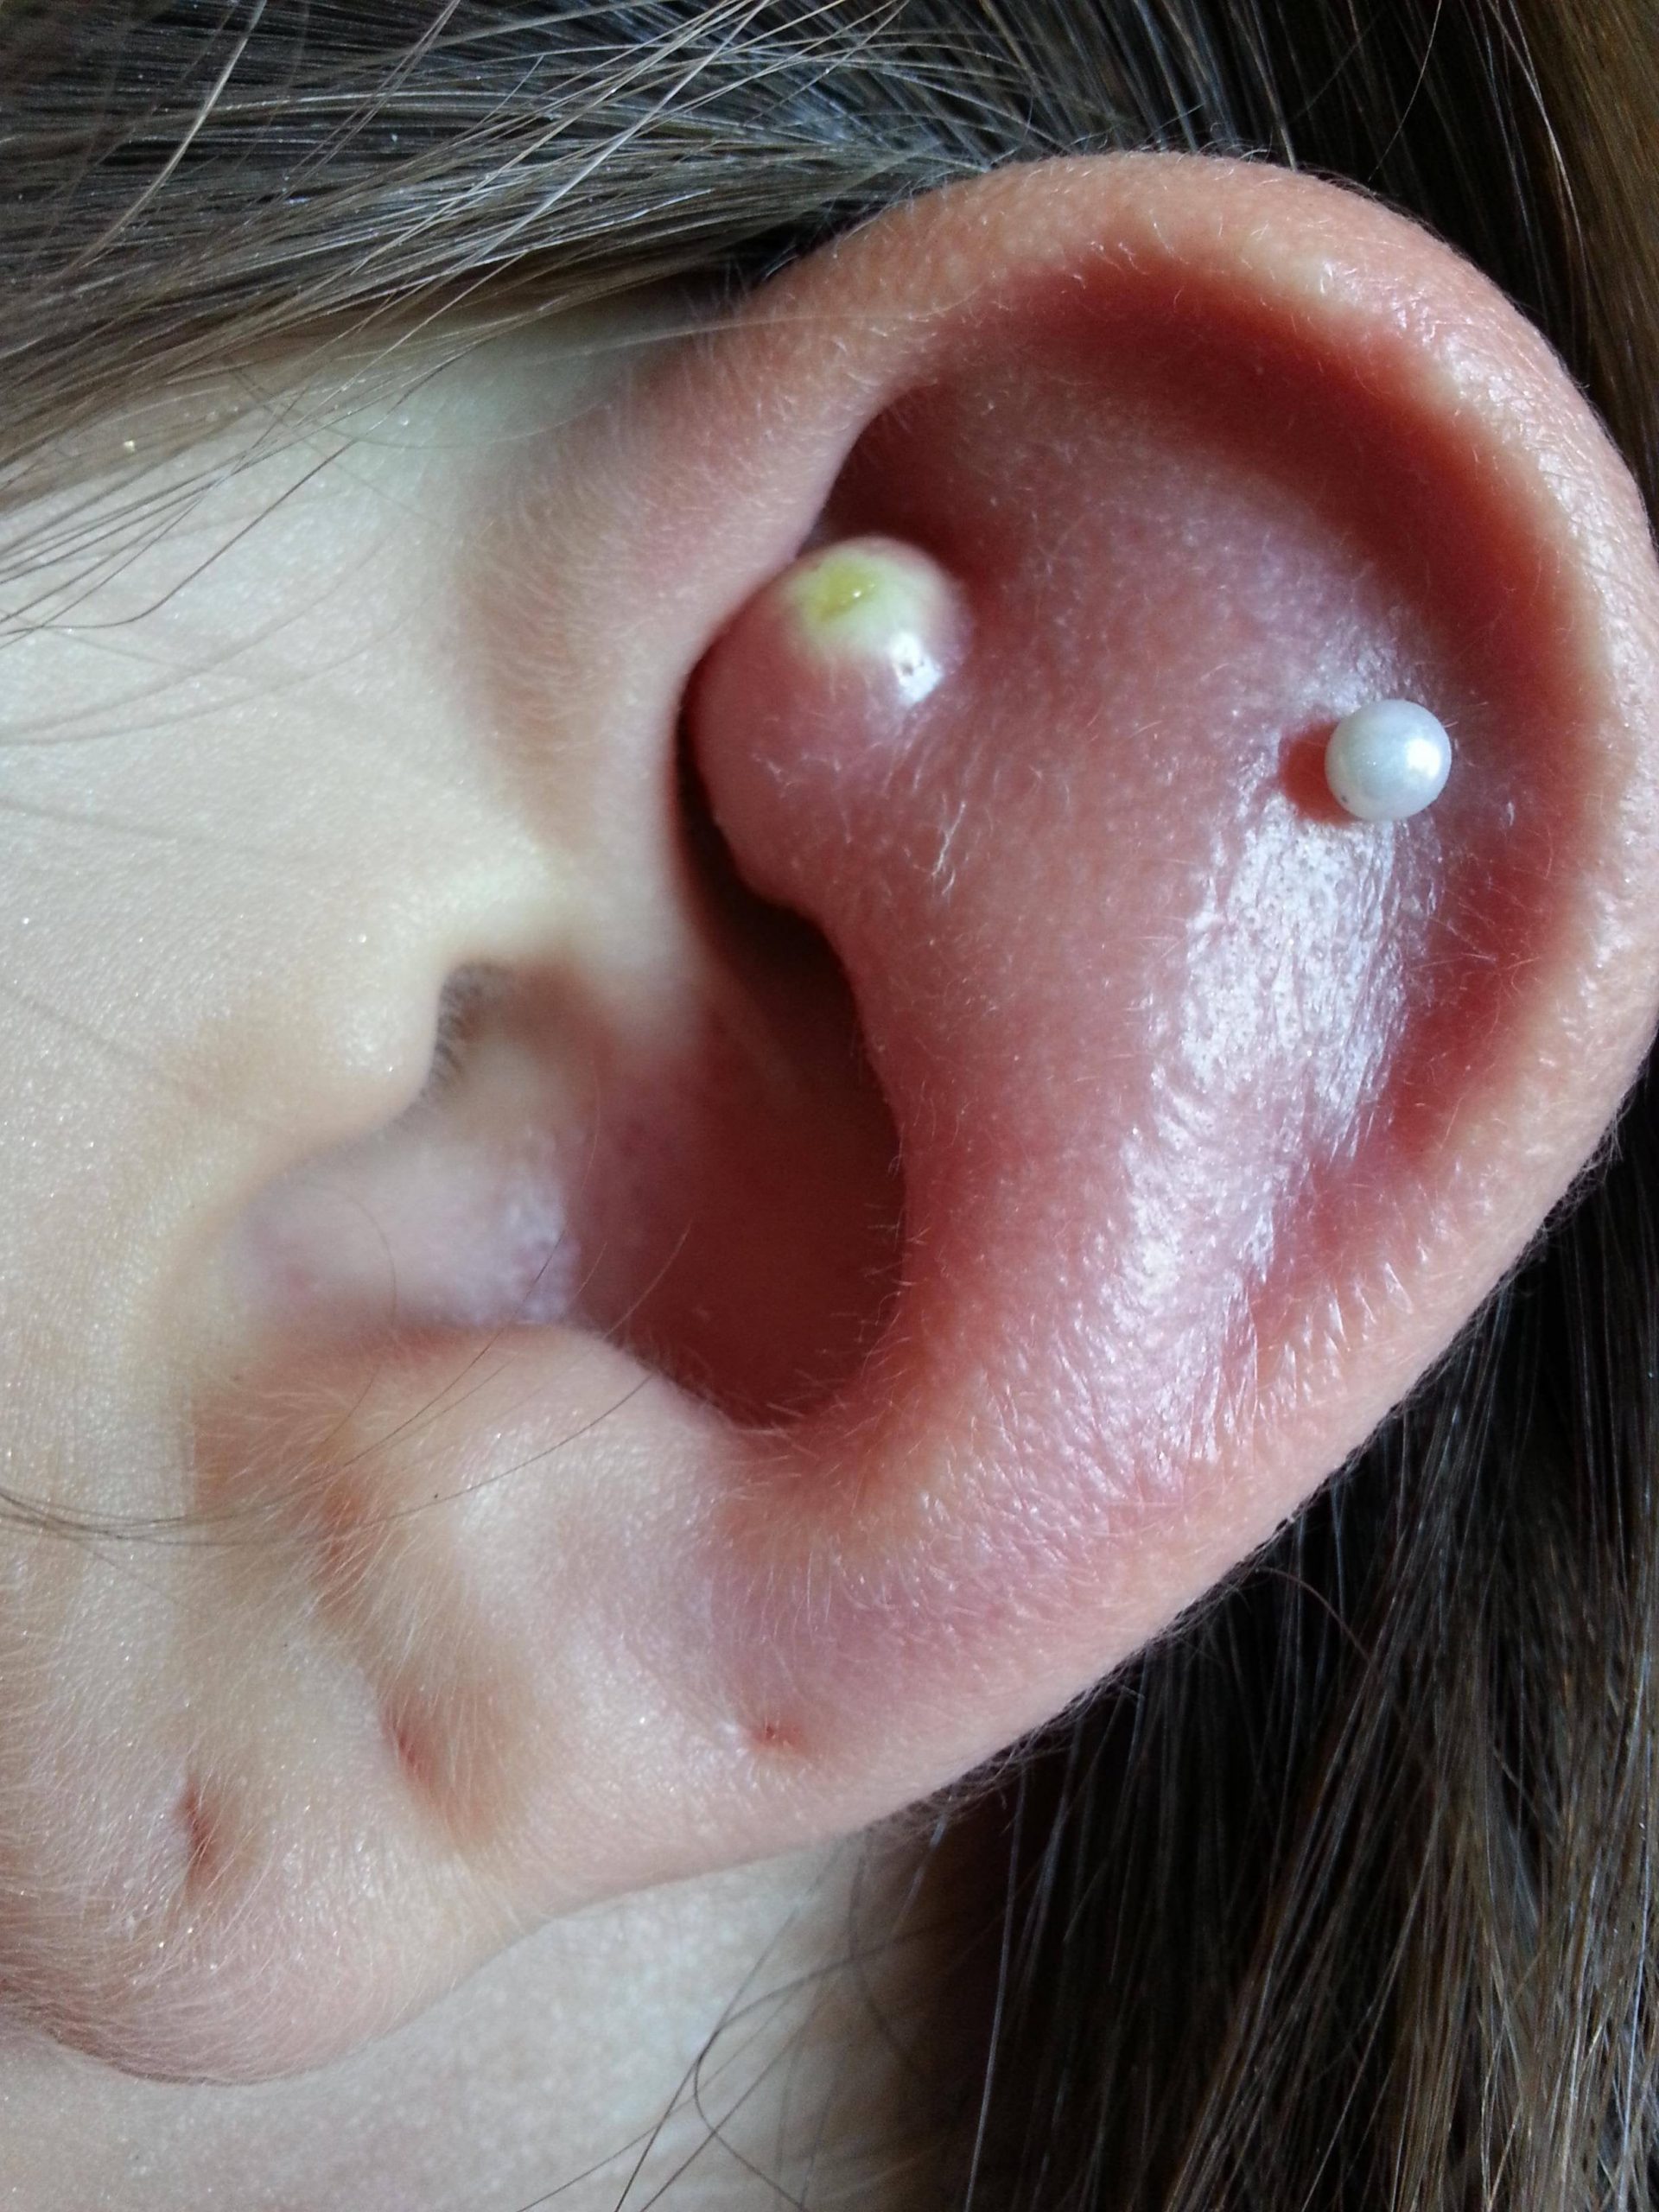 My sisters ear after taking an infected rook piercing out. : WTF